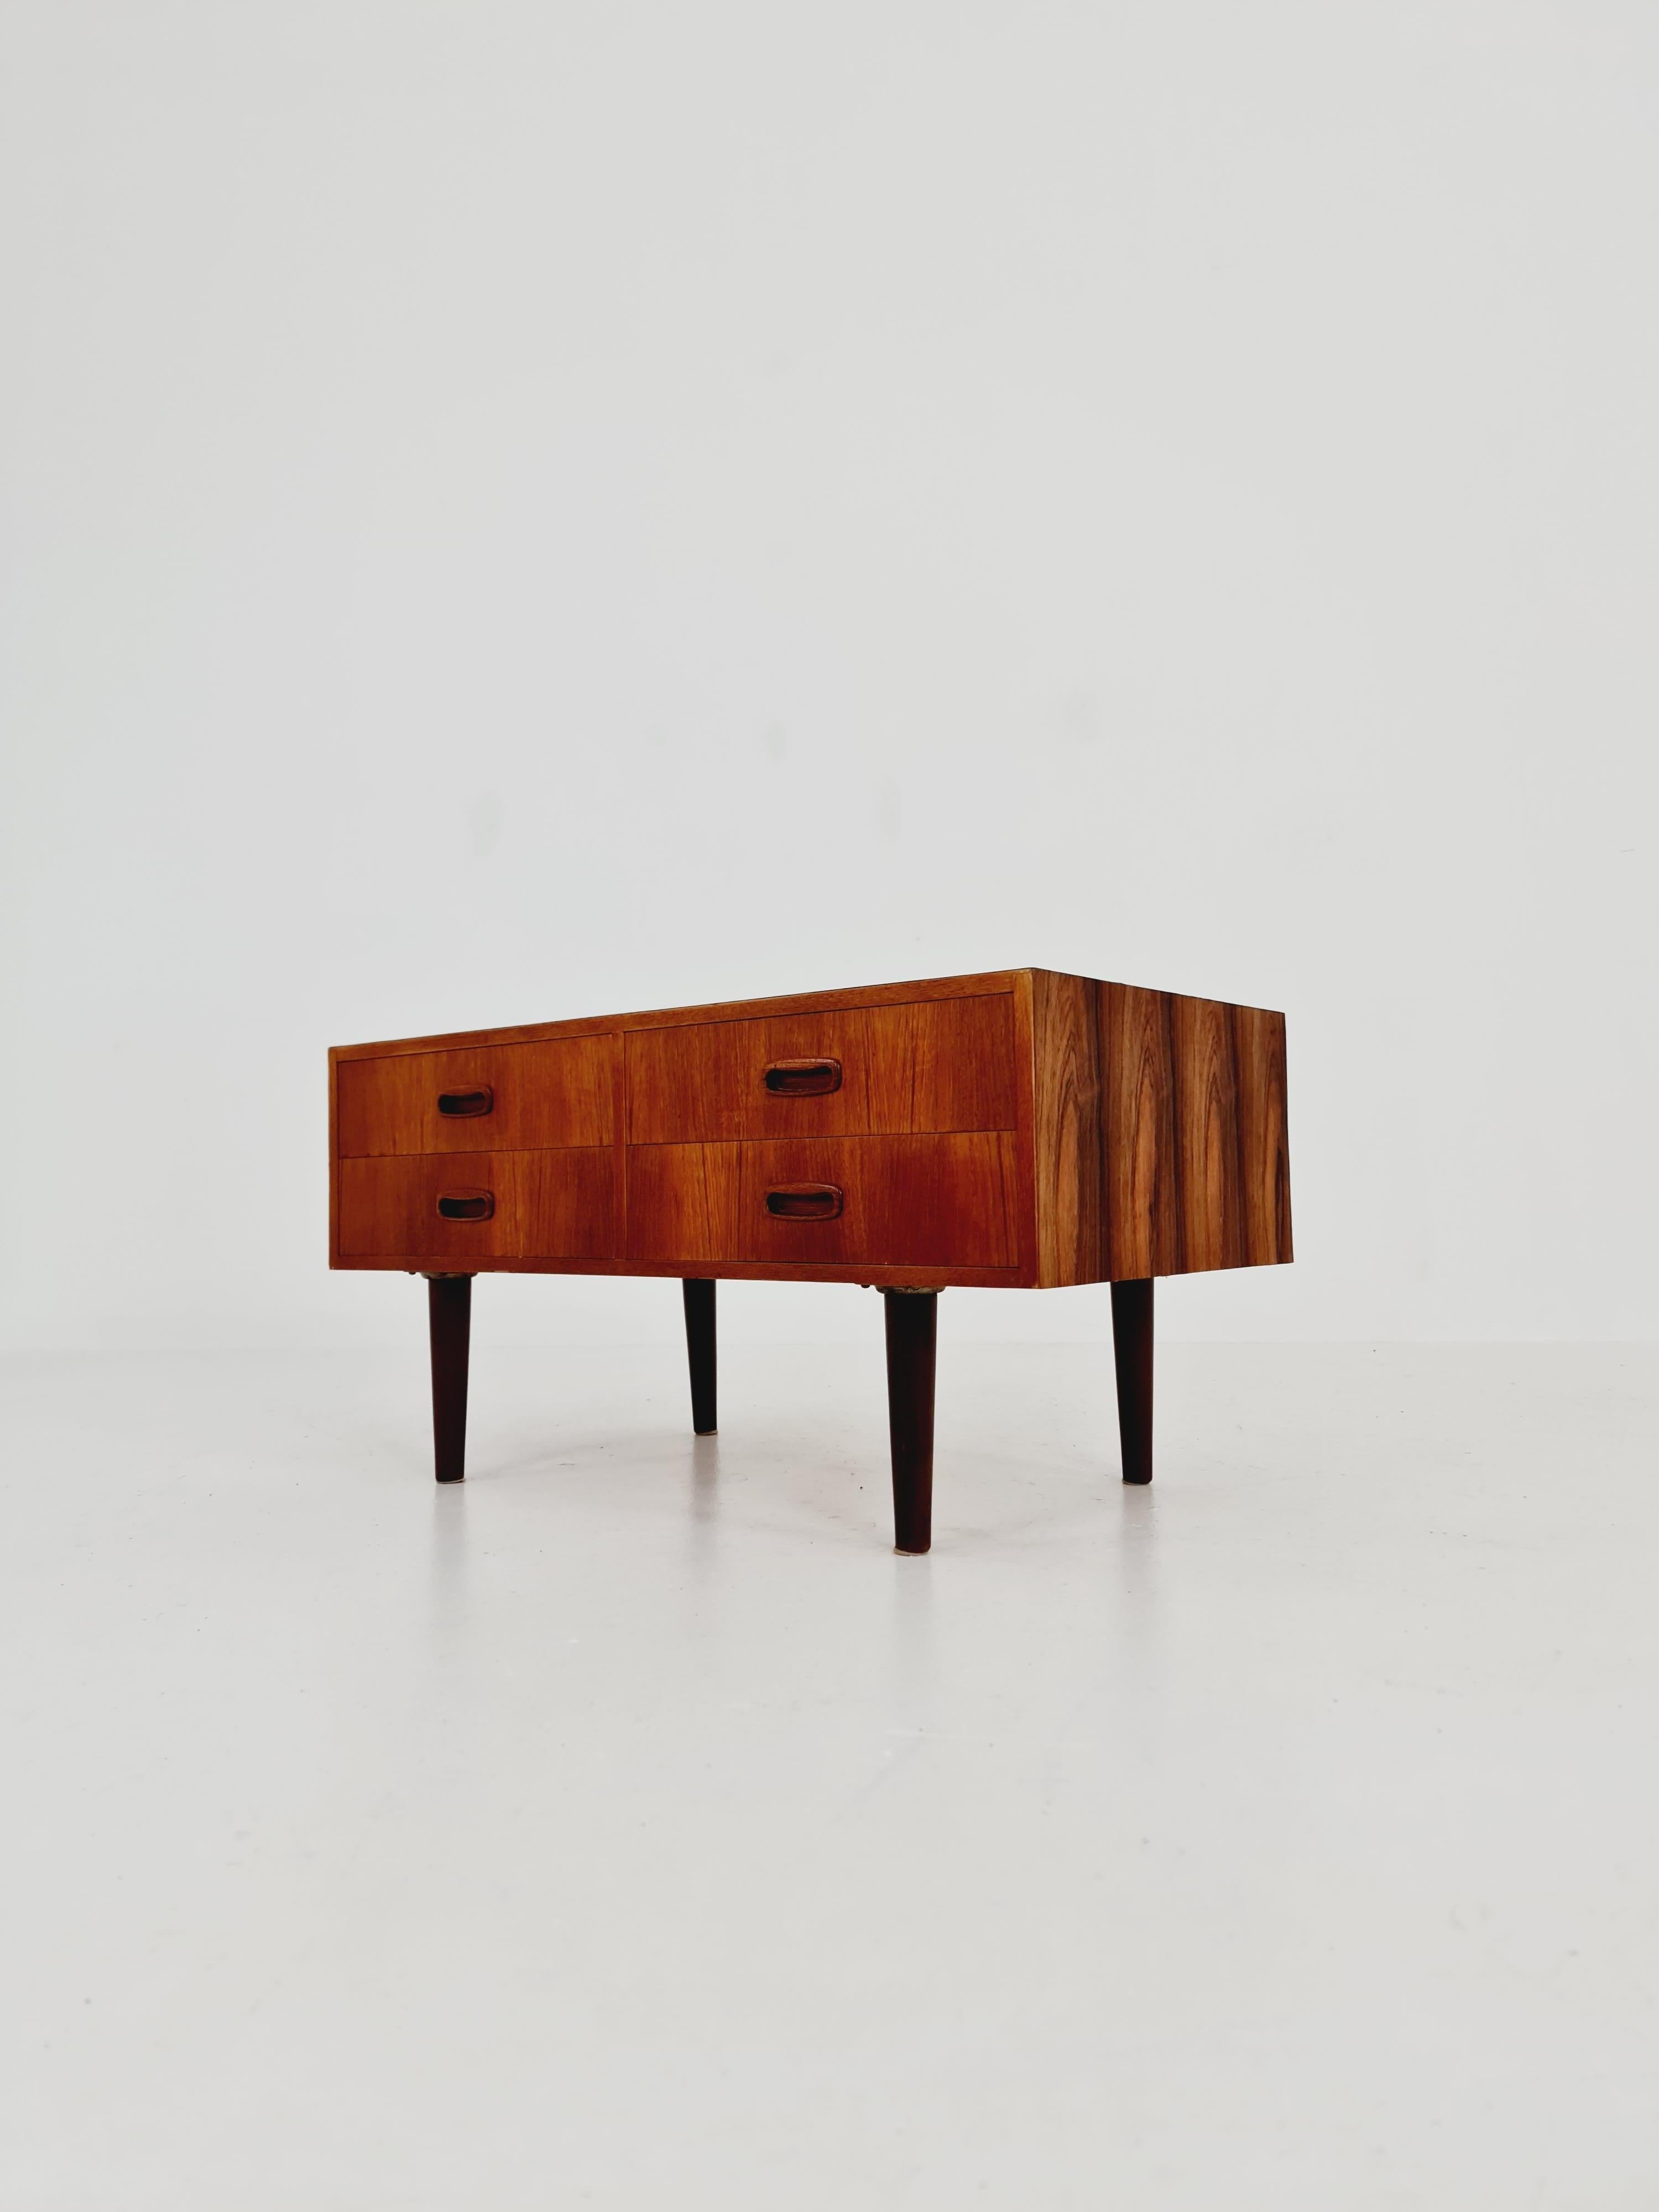 Rare Mid Century Modern Danish rosewood Sideboard with drawers, 1950s For Sale 3